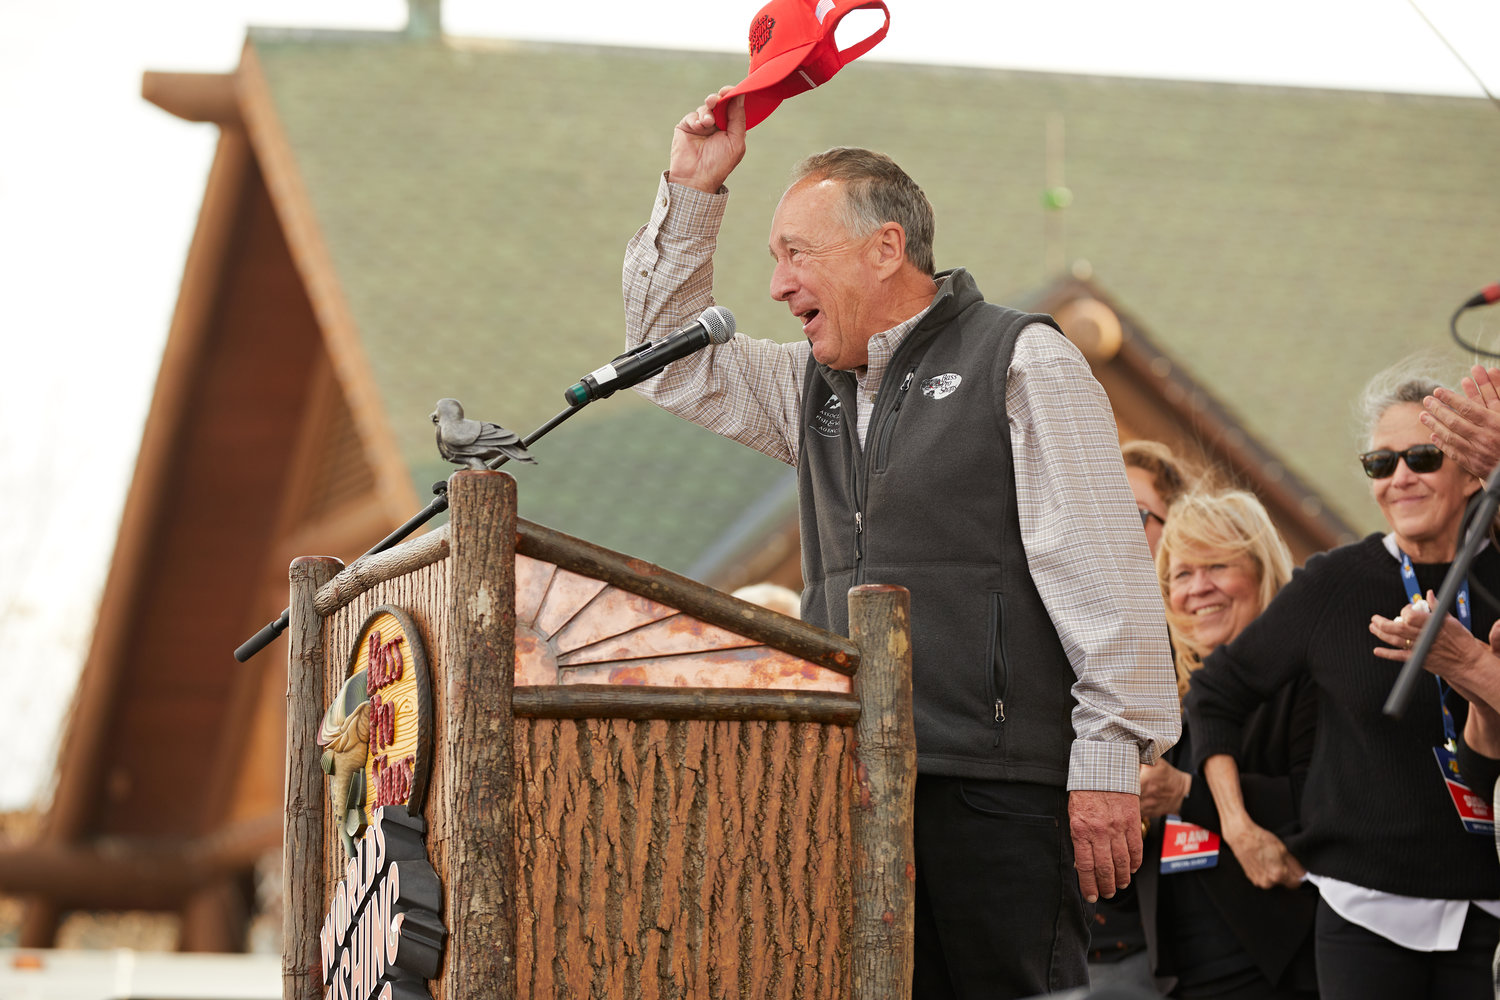 Johnny Morris, founder and CEO of Bass Pro Shops, welcomes the crowd at the kickoff ceremony for the World’s Fishing Fair Wednesday.